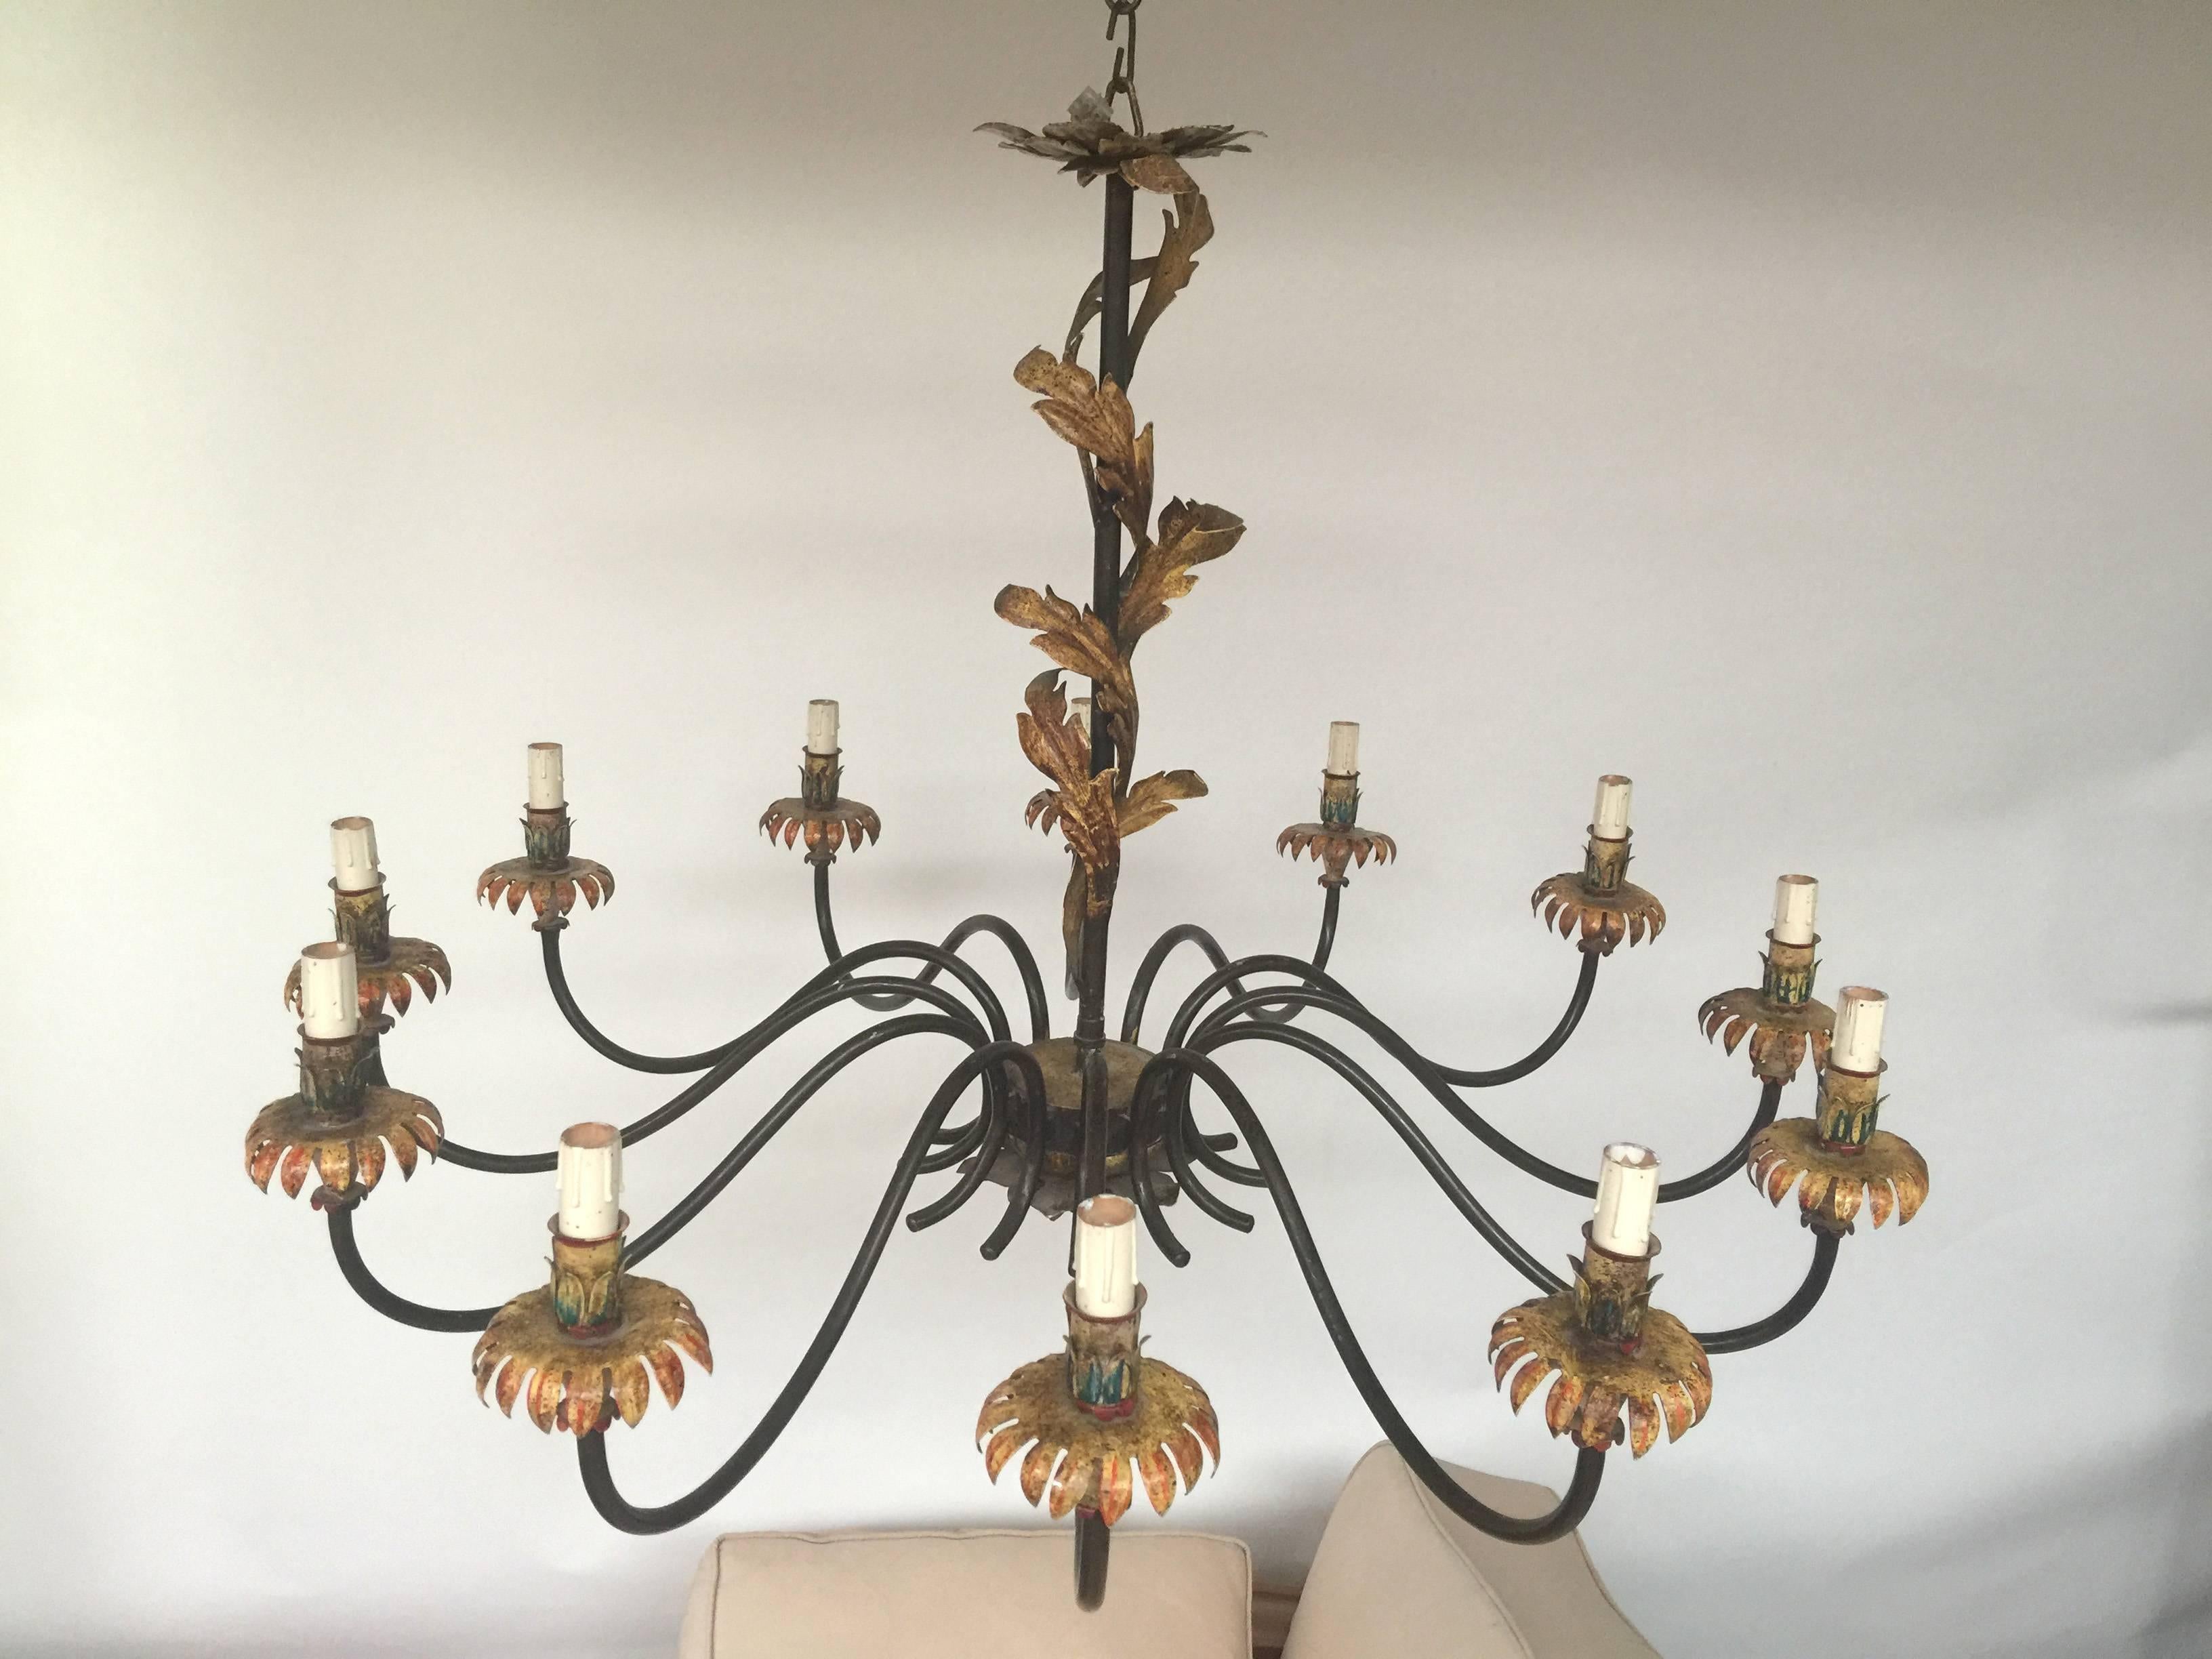 Neoclassical Revival Twelve Lights Lacquered Wrought Iron Chandelier